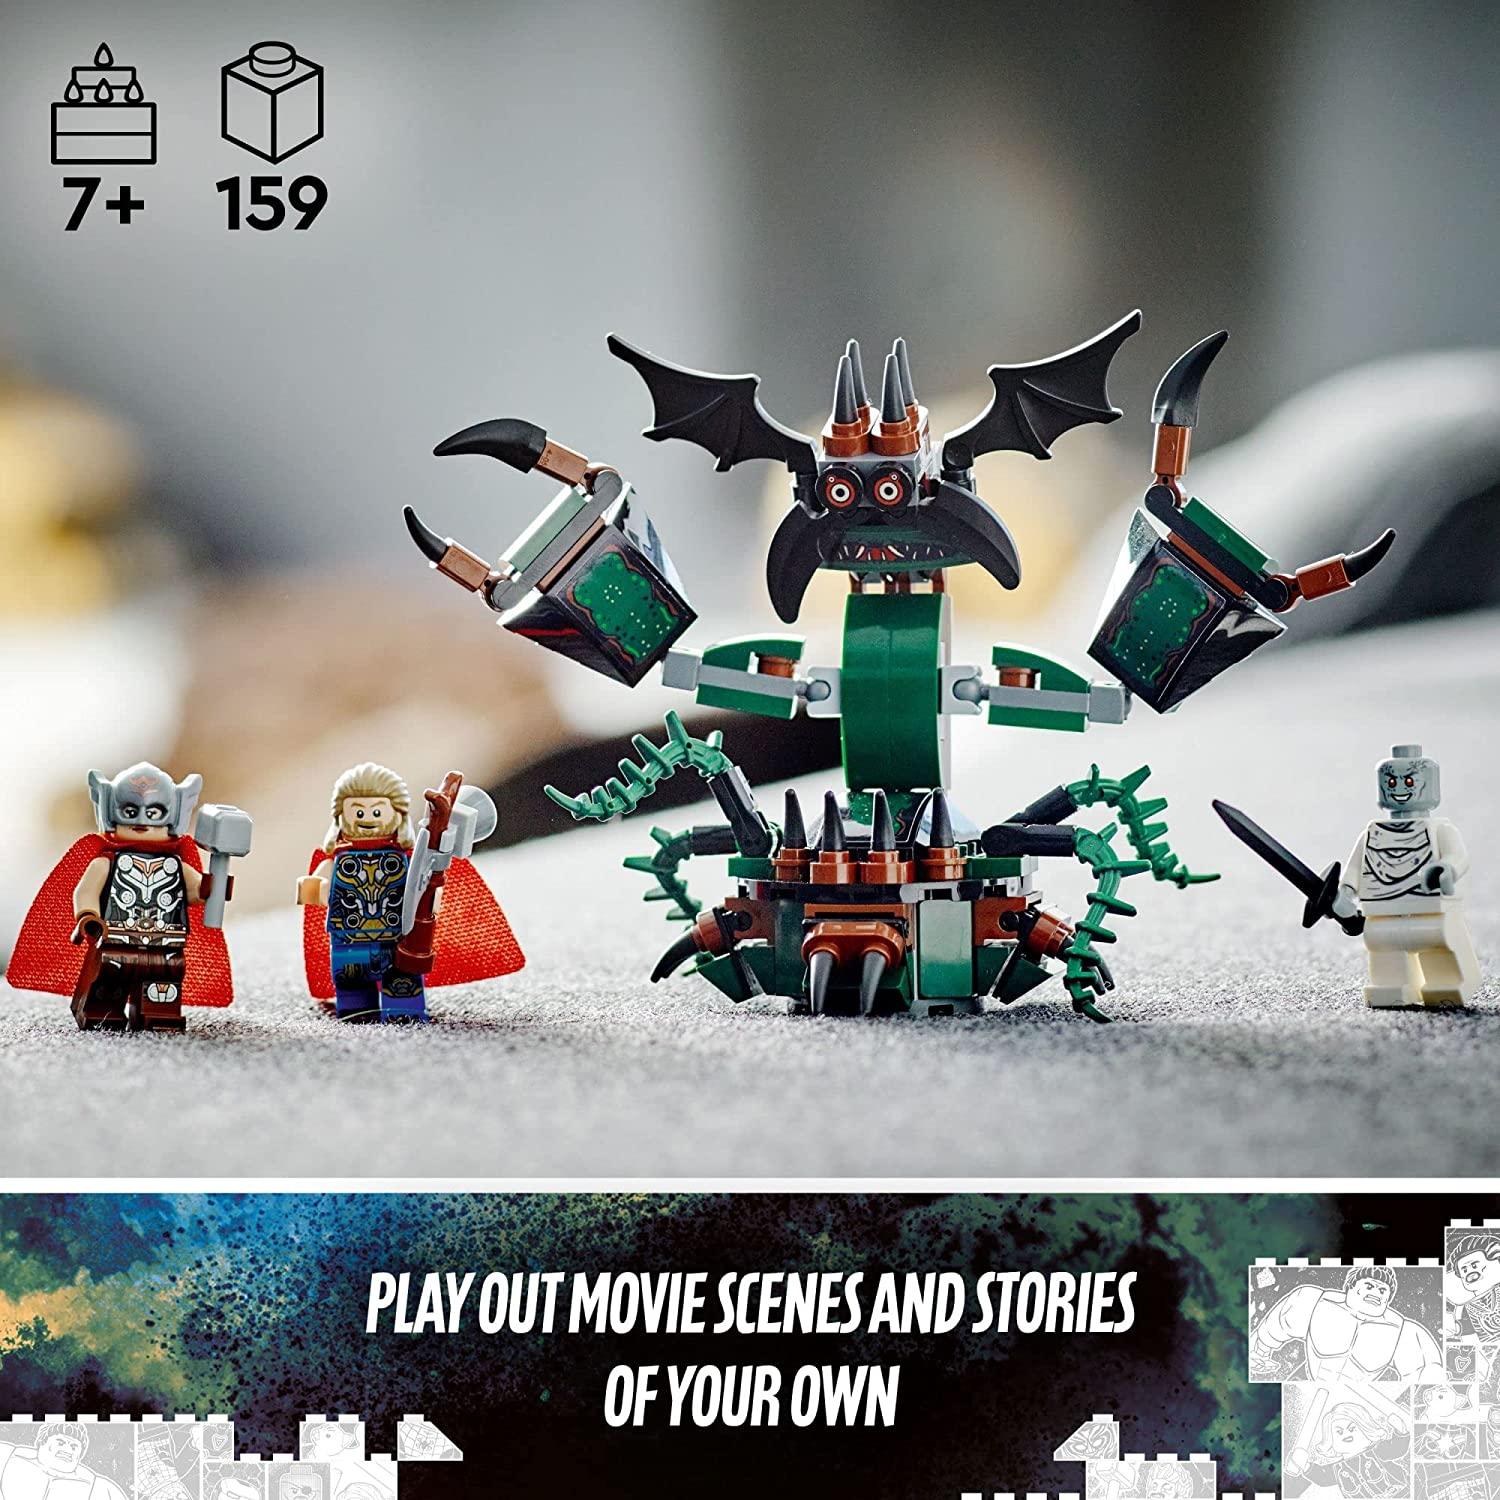 LEGO Marvel Attack on New Asgard 76207 Building Kit; Thor Construction Toy with 2 Minifigures for Kids Aged 7+ (159 Pieces) - BumbleToys - 8+ Years, 8-13 Years, Action Figures, Avengers, Boys, Figures, LEGO, Marvel, OXE, Pre-Order, Thor